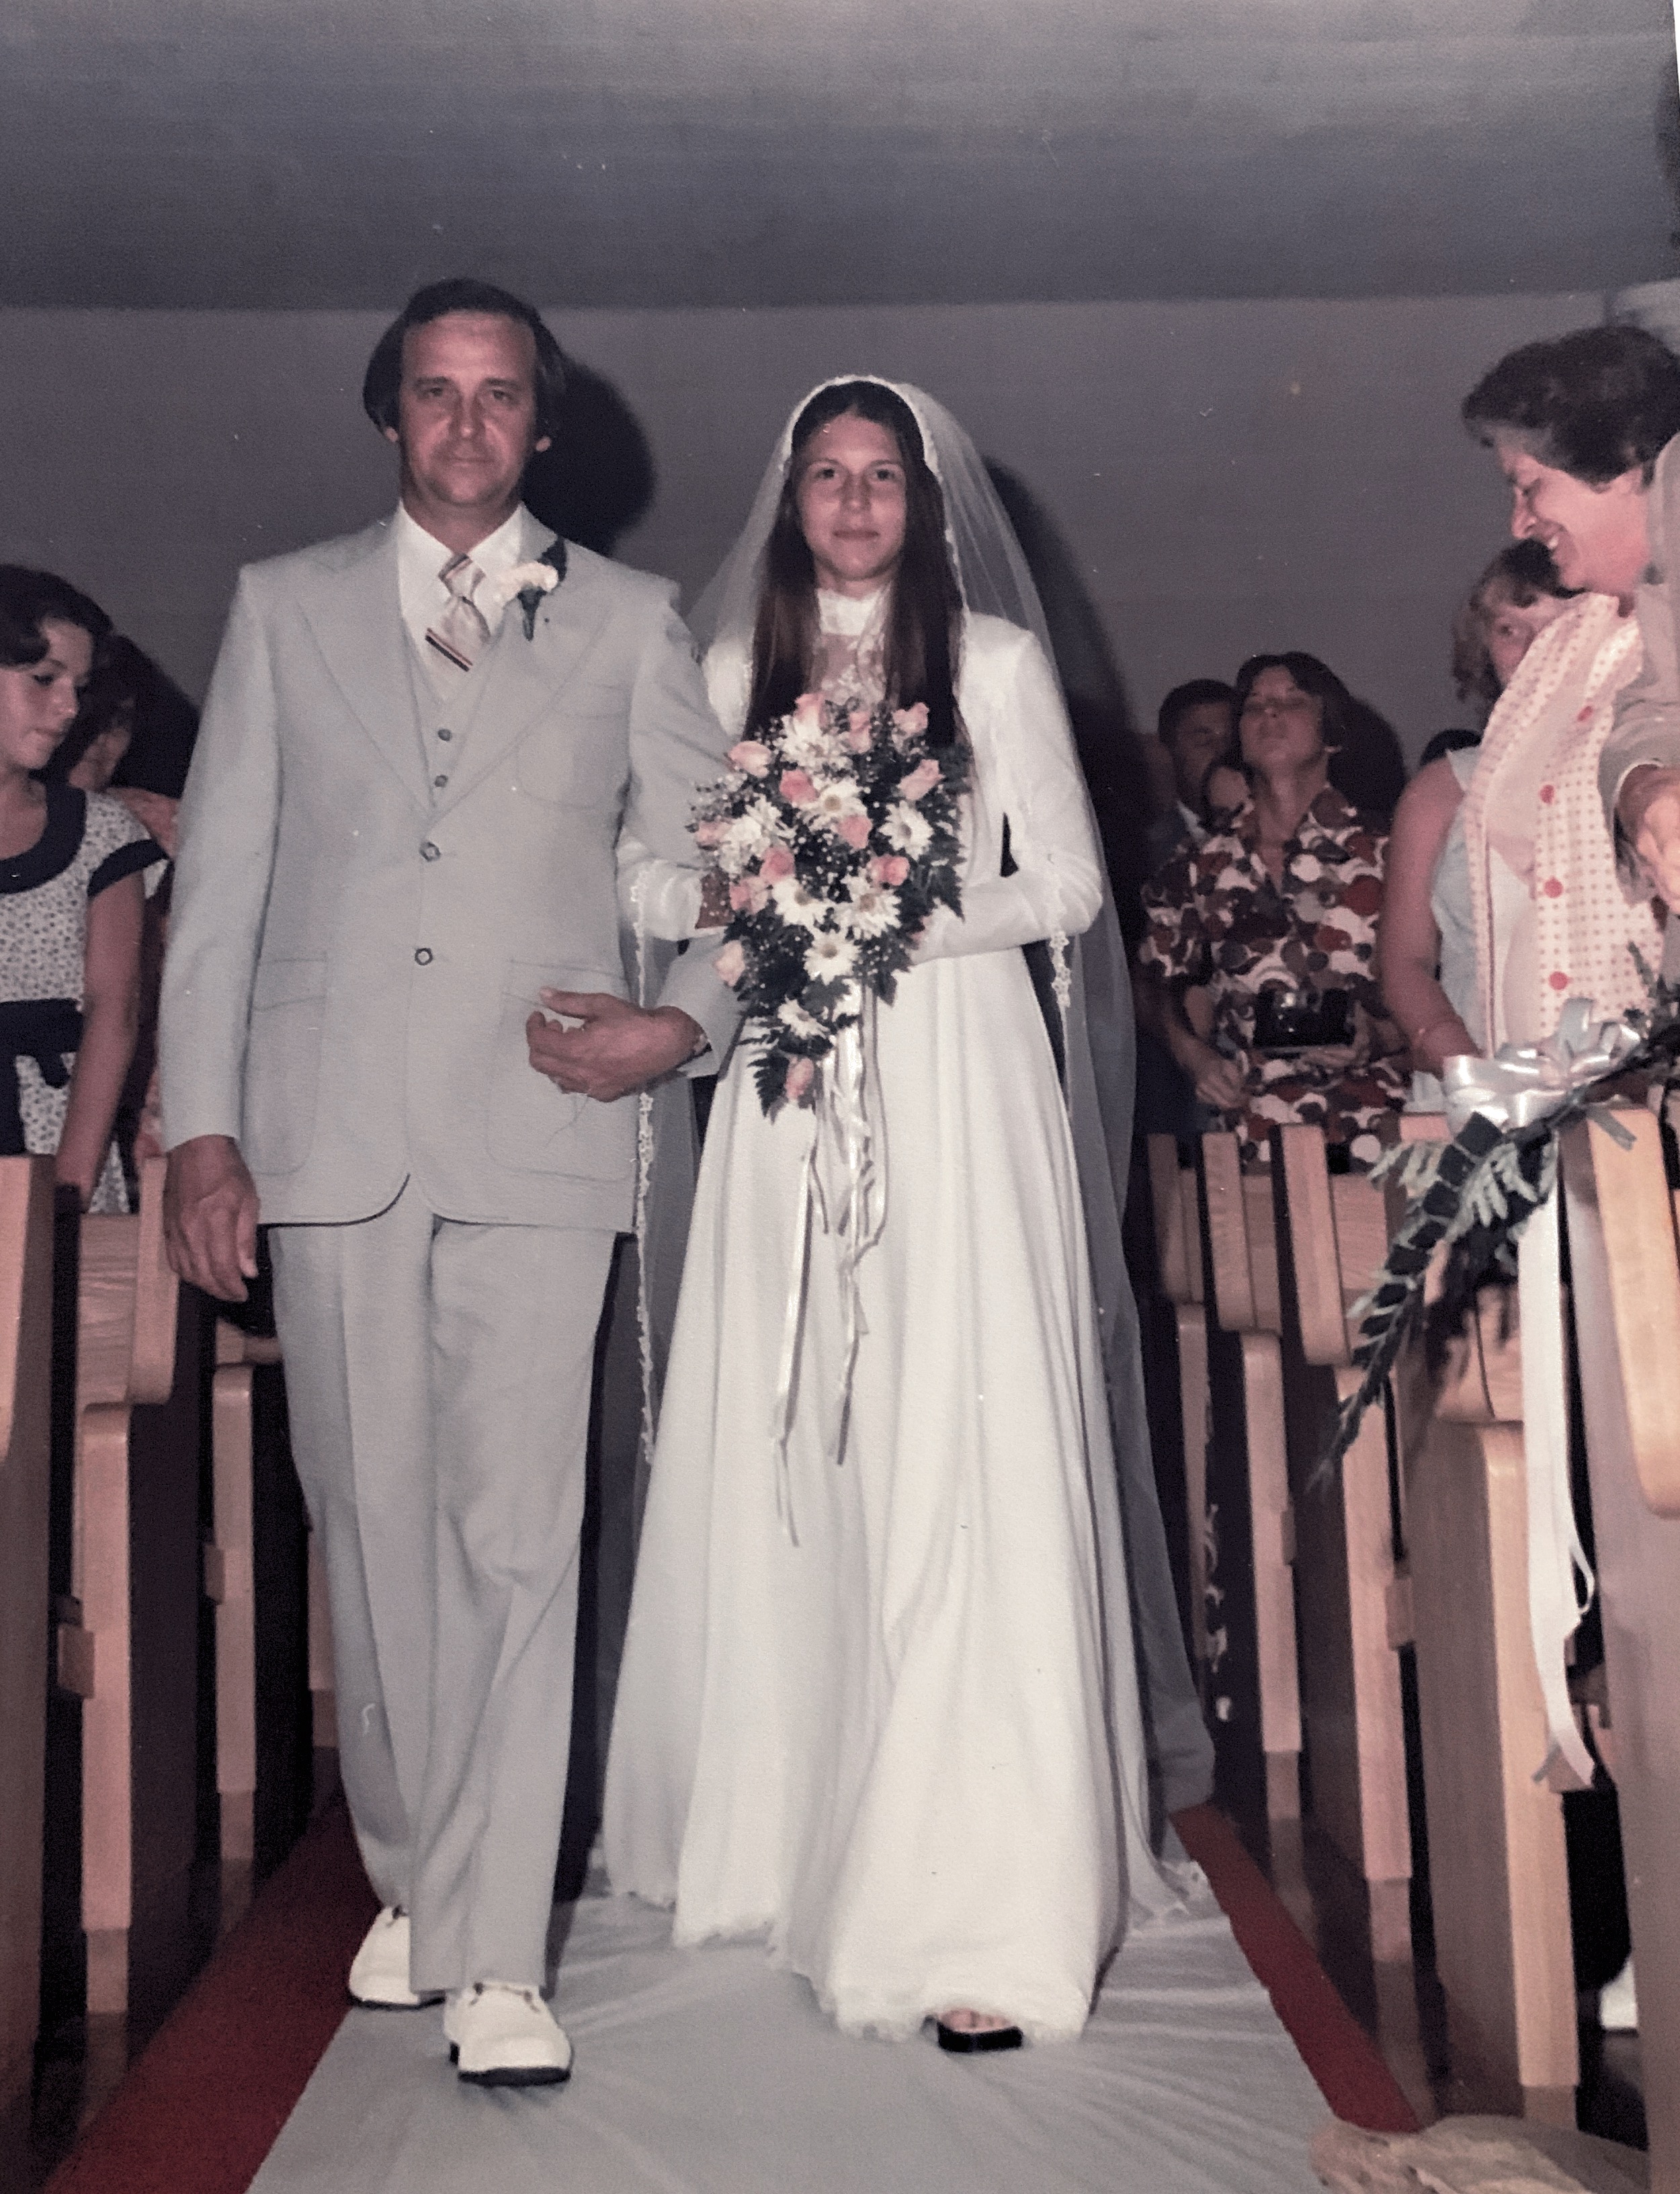 I was married on Fathers Day June 19, 1977, Daddy and I had a special moment alone before he walked me down that aisle. We still look for those quiet moments together all these years later. I love you daddy Happy Fathers Day!